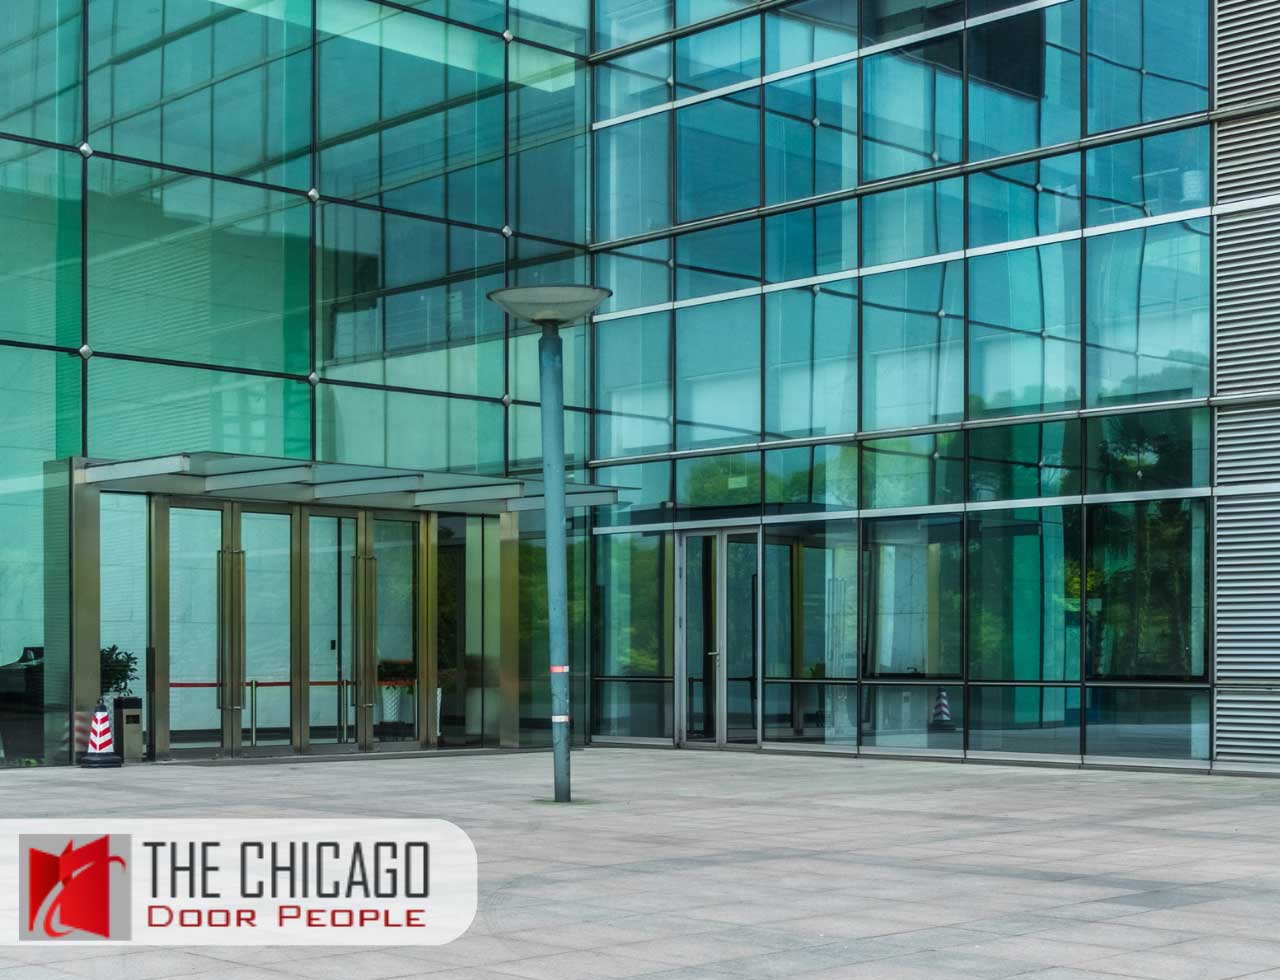 Contact Chicago Door People to provide you with interior or exterior commercial doors